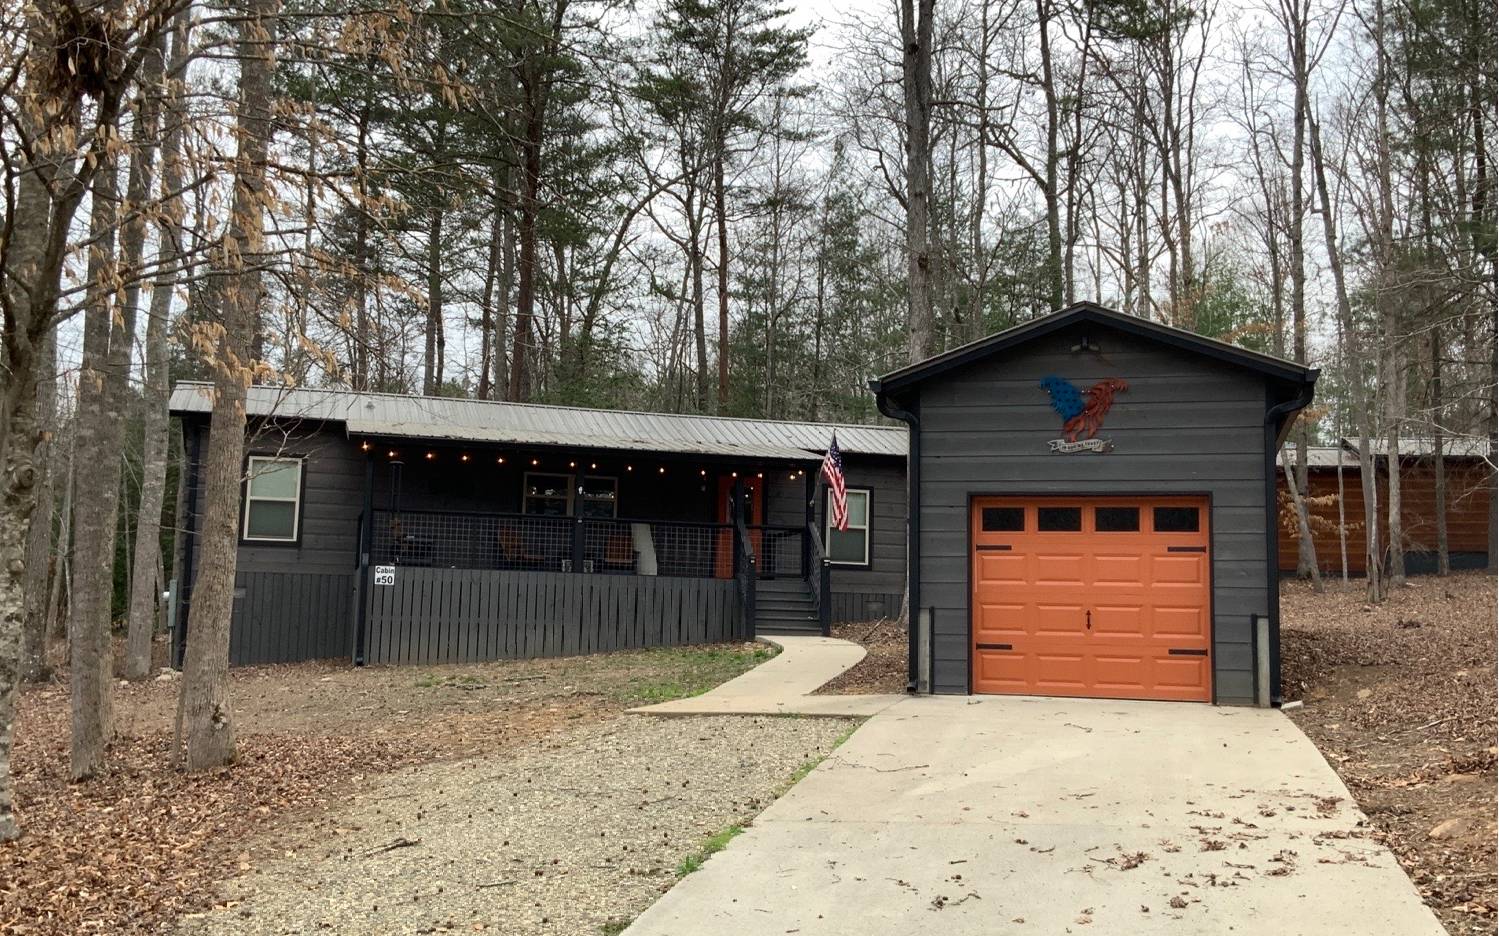 Great two bedroom two full bath cabin in Copperhead lodge resort. Fully furnished with detached garage. Huge back porch with hot tub. Front porch is awesome for just relaxing the evening nights away.